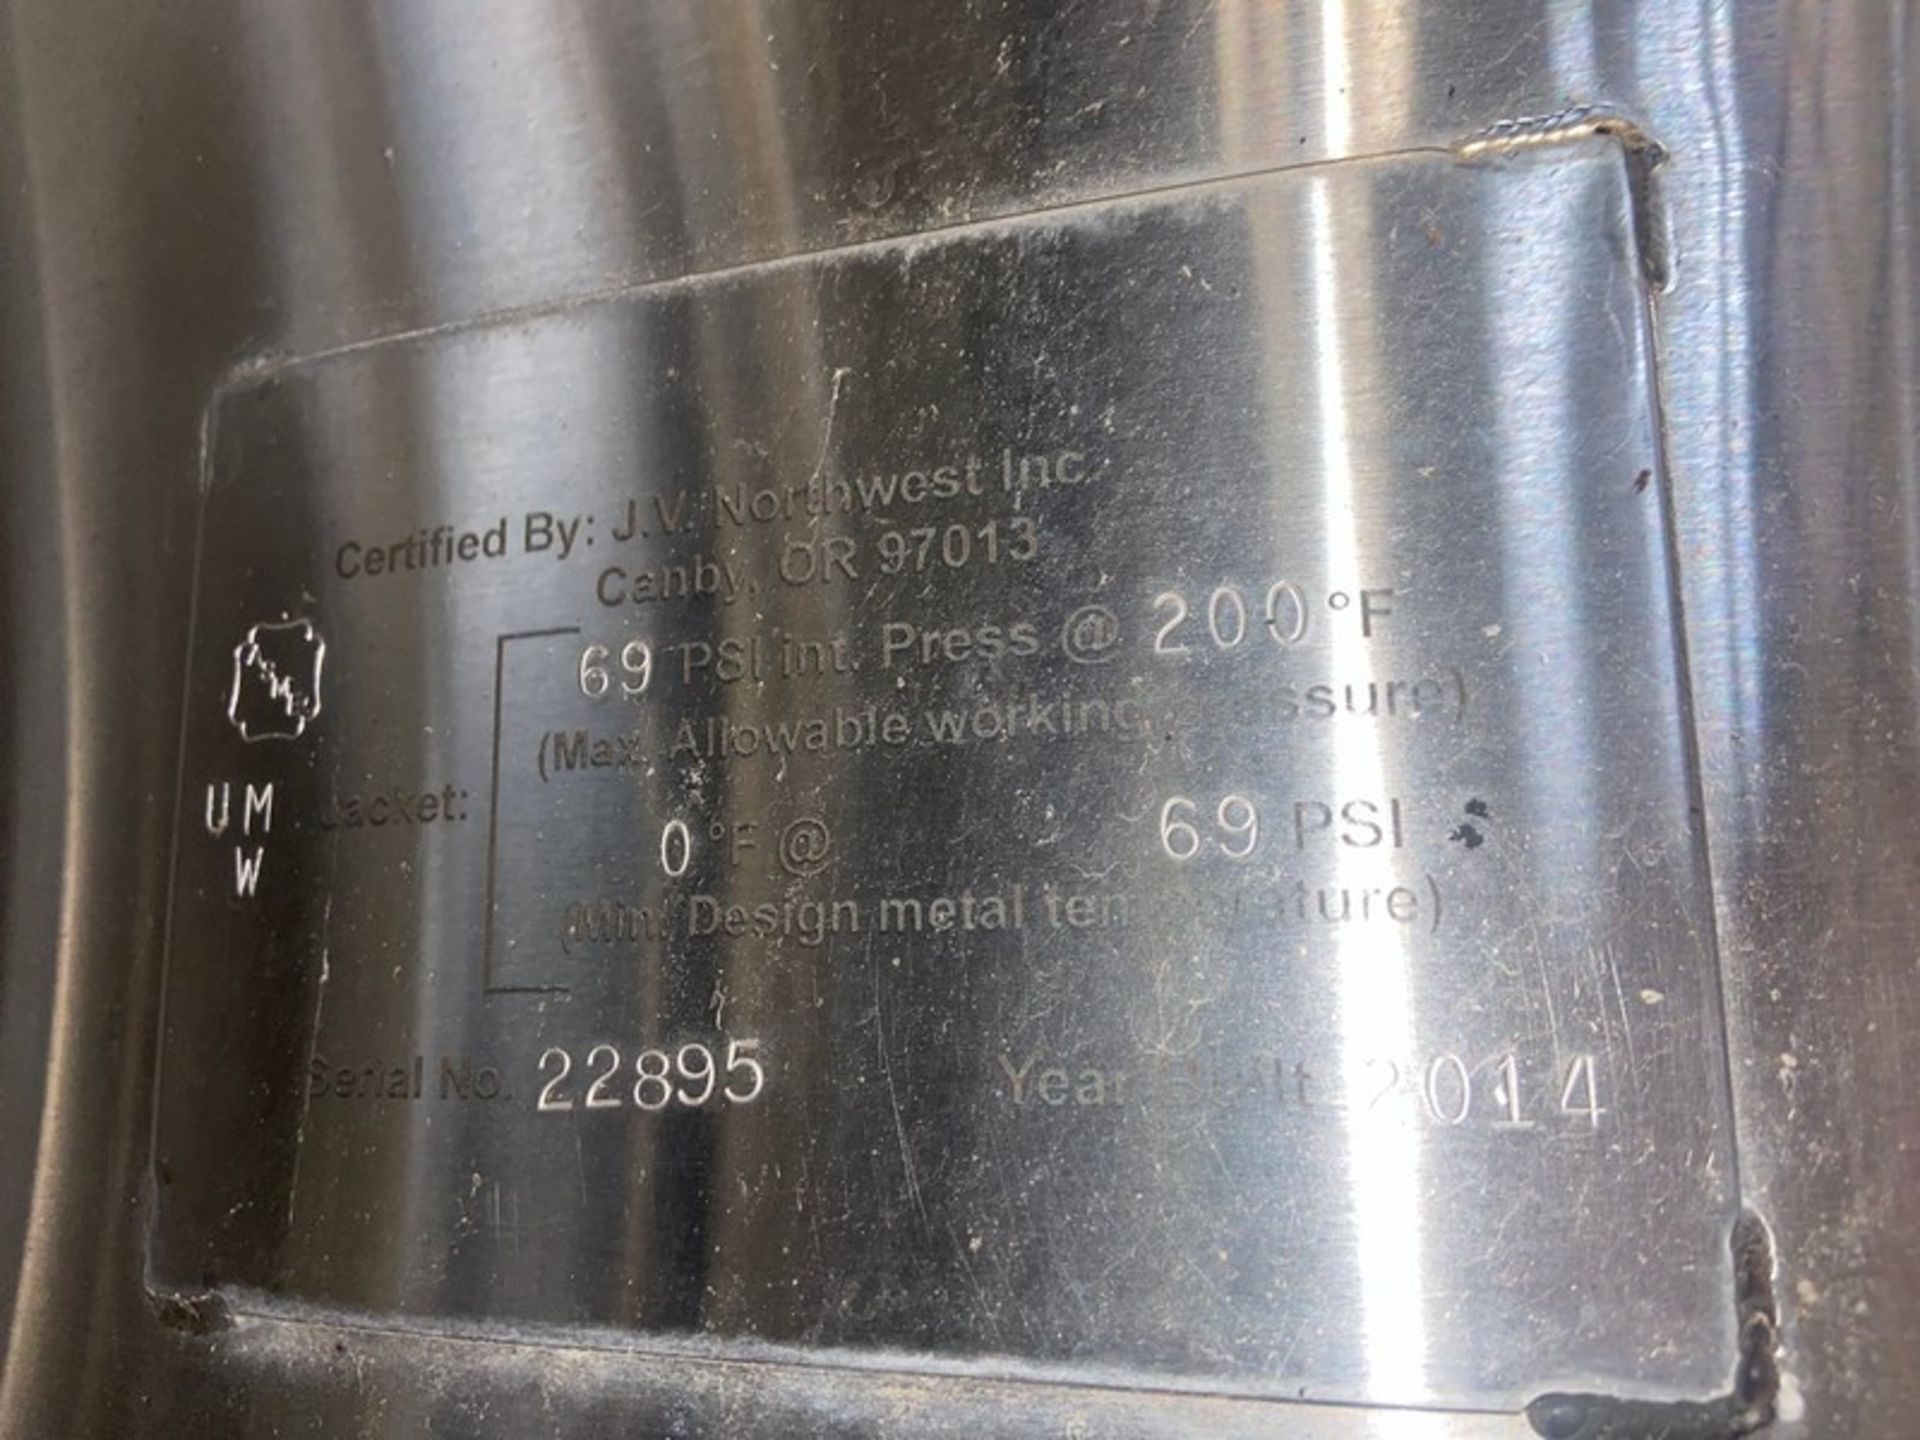 2014 JVNW 15 BBL(465 GAL.) S/S Jacketed Vertical Tank, S/N 22895, 69 PSI Int. Press @ 200 F, 0 F @ - Image 11 of 12